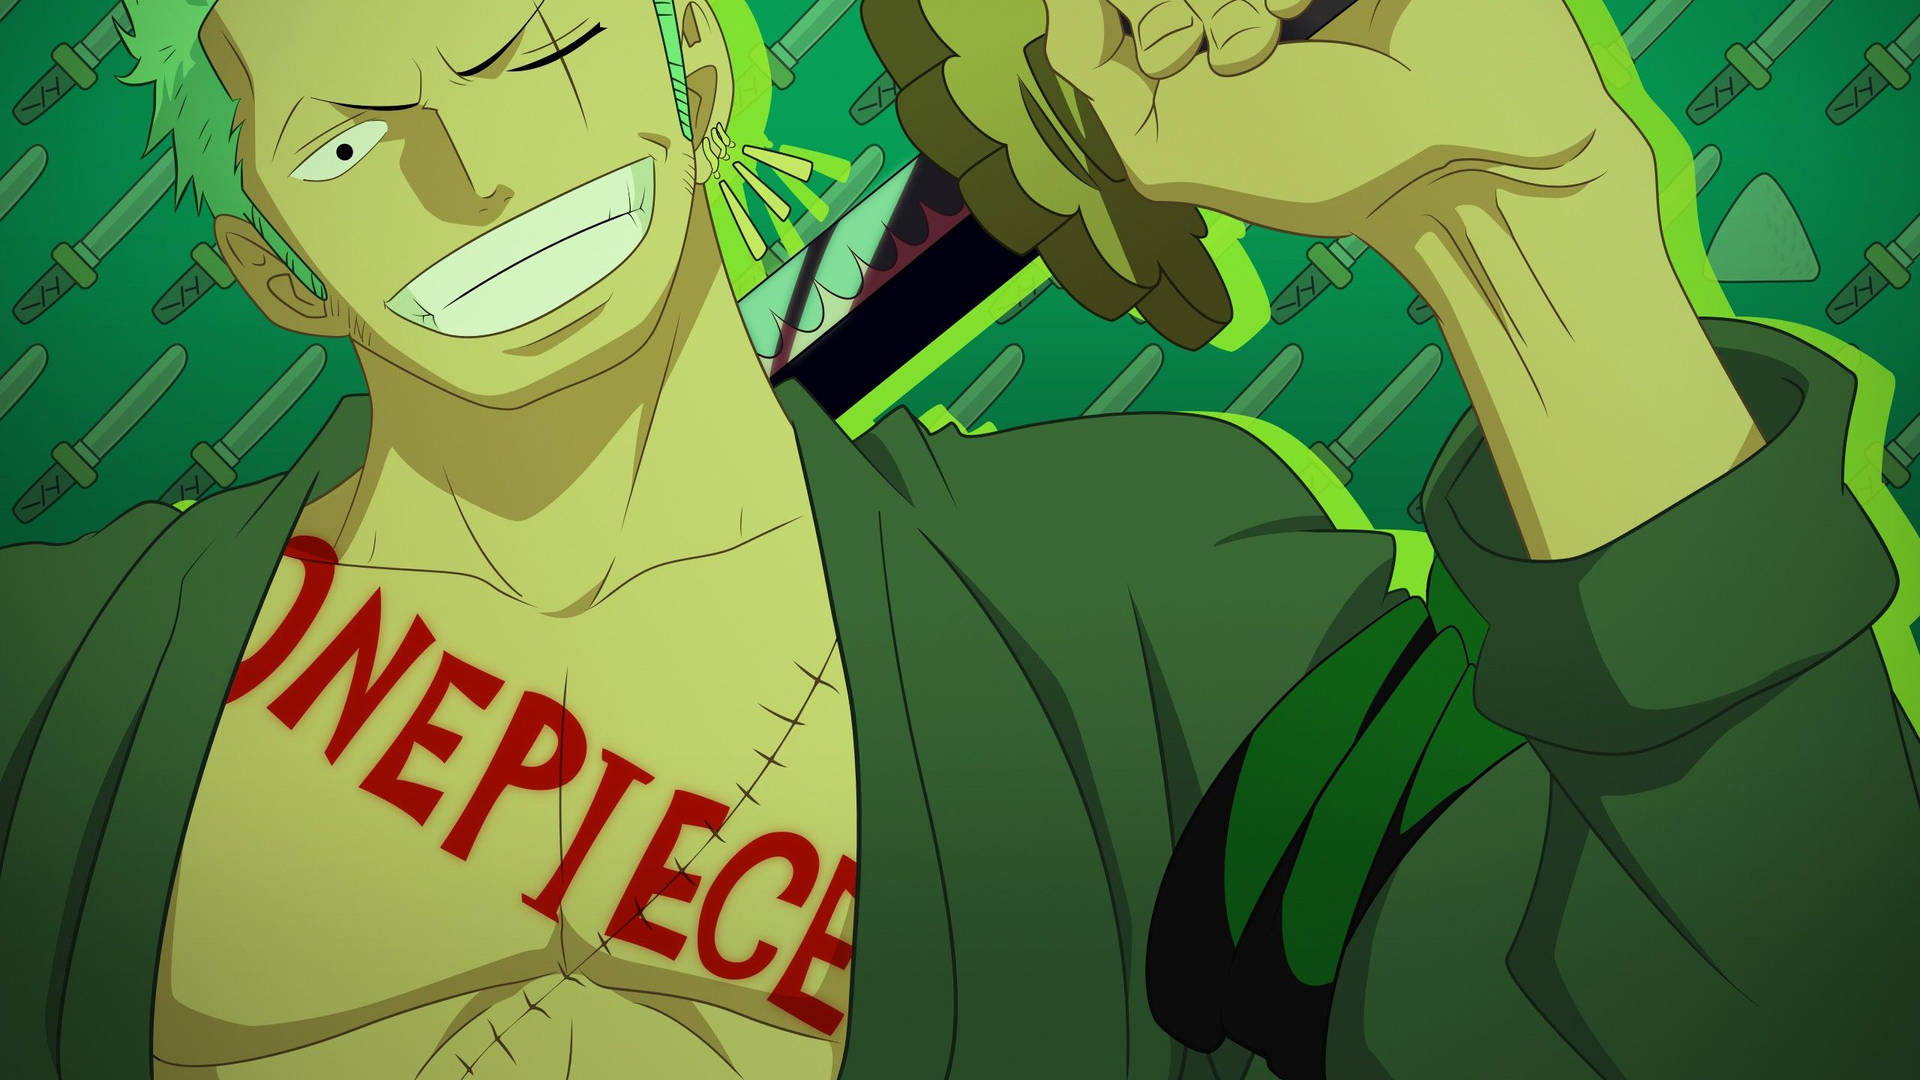 One Piece Zoro 4k wallpaper for desktop and mobile phone